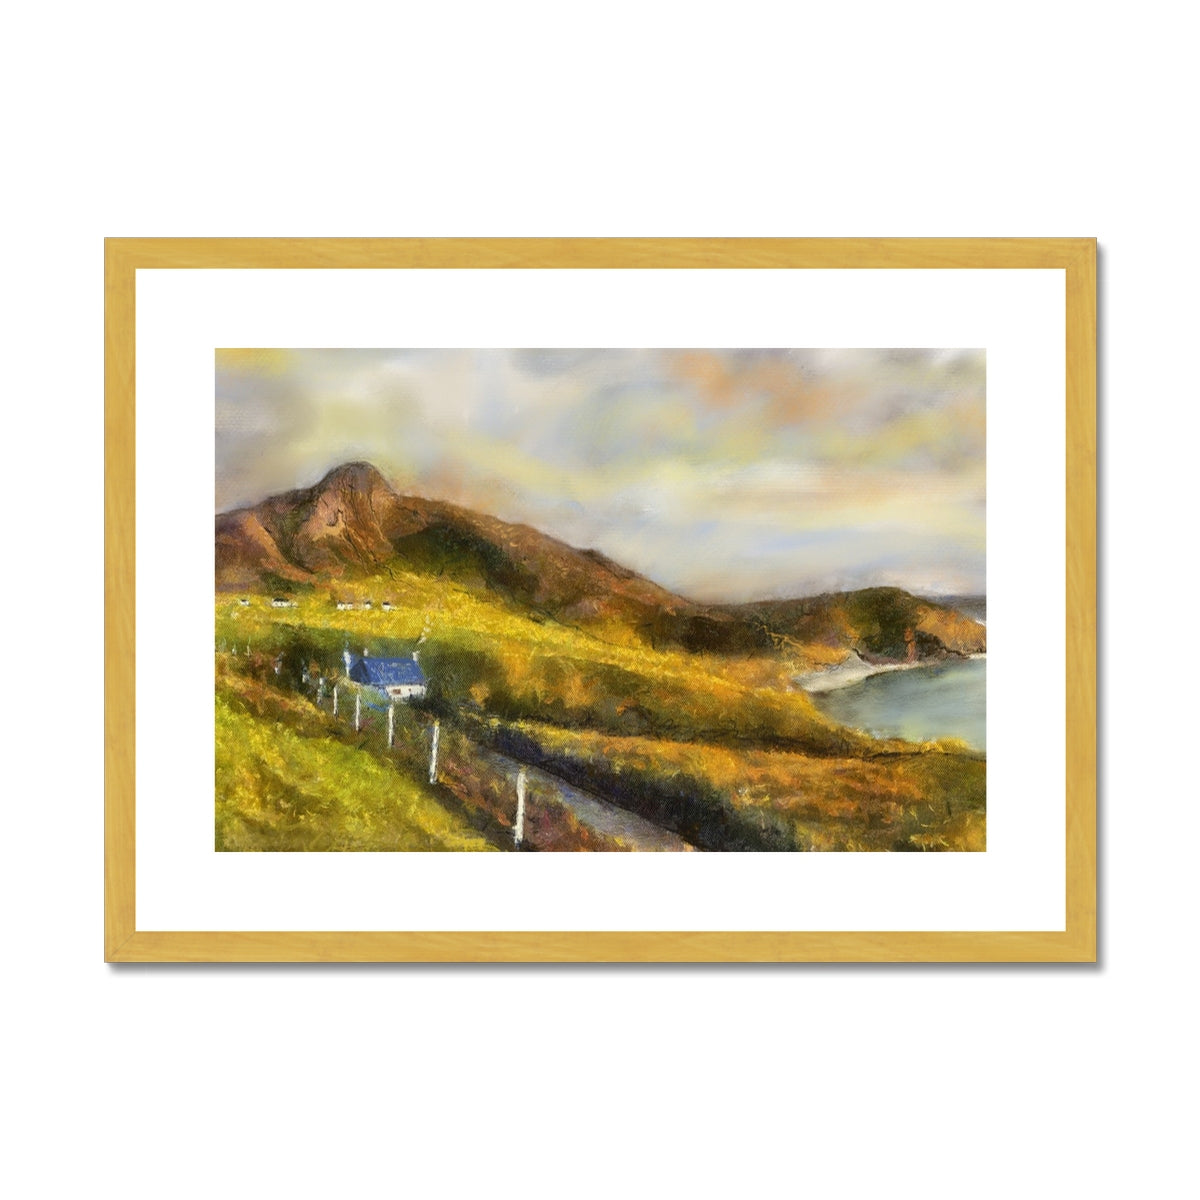 Coldbackie Painting | Antique Framed & Mounted Prints From Scotland-Antique Framed & Mounted Prints-Scottish Highlands & Lowlands Art Gallery-A2 Landscape-Gold Frame-Paintings, Prints, Homeware, Art Gifts From Scotland By Scottish Artist Kevin Hunter